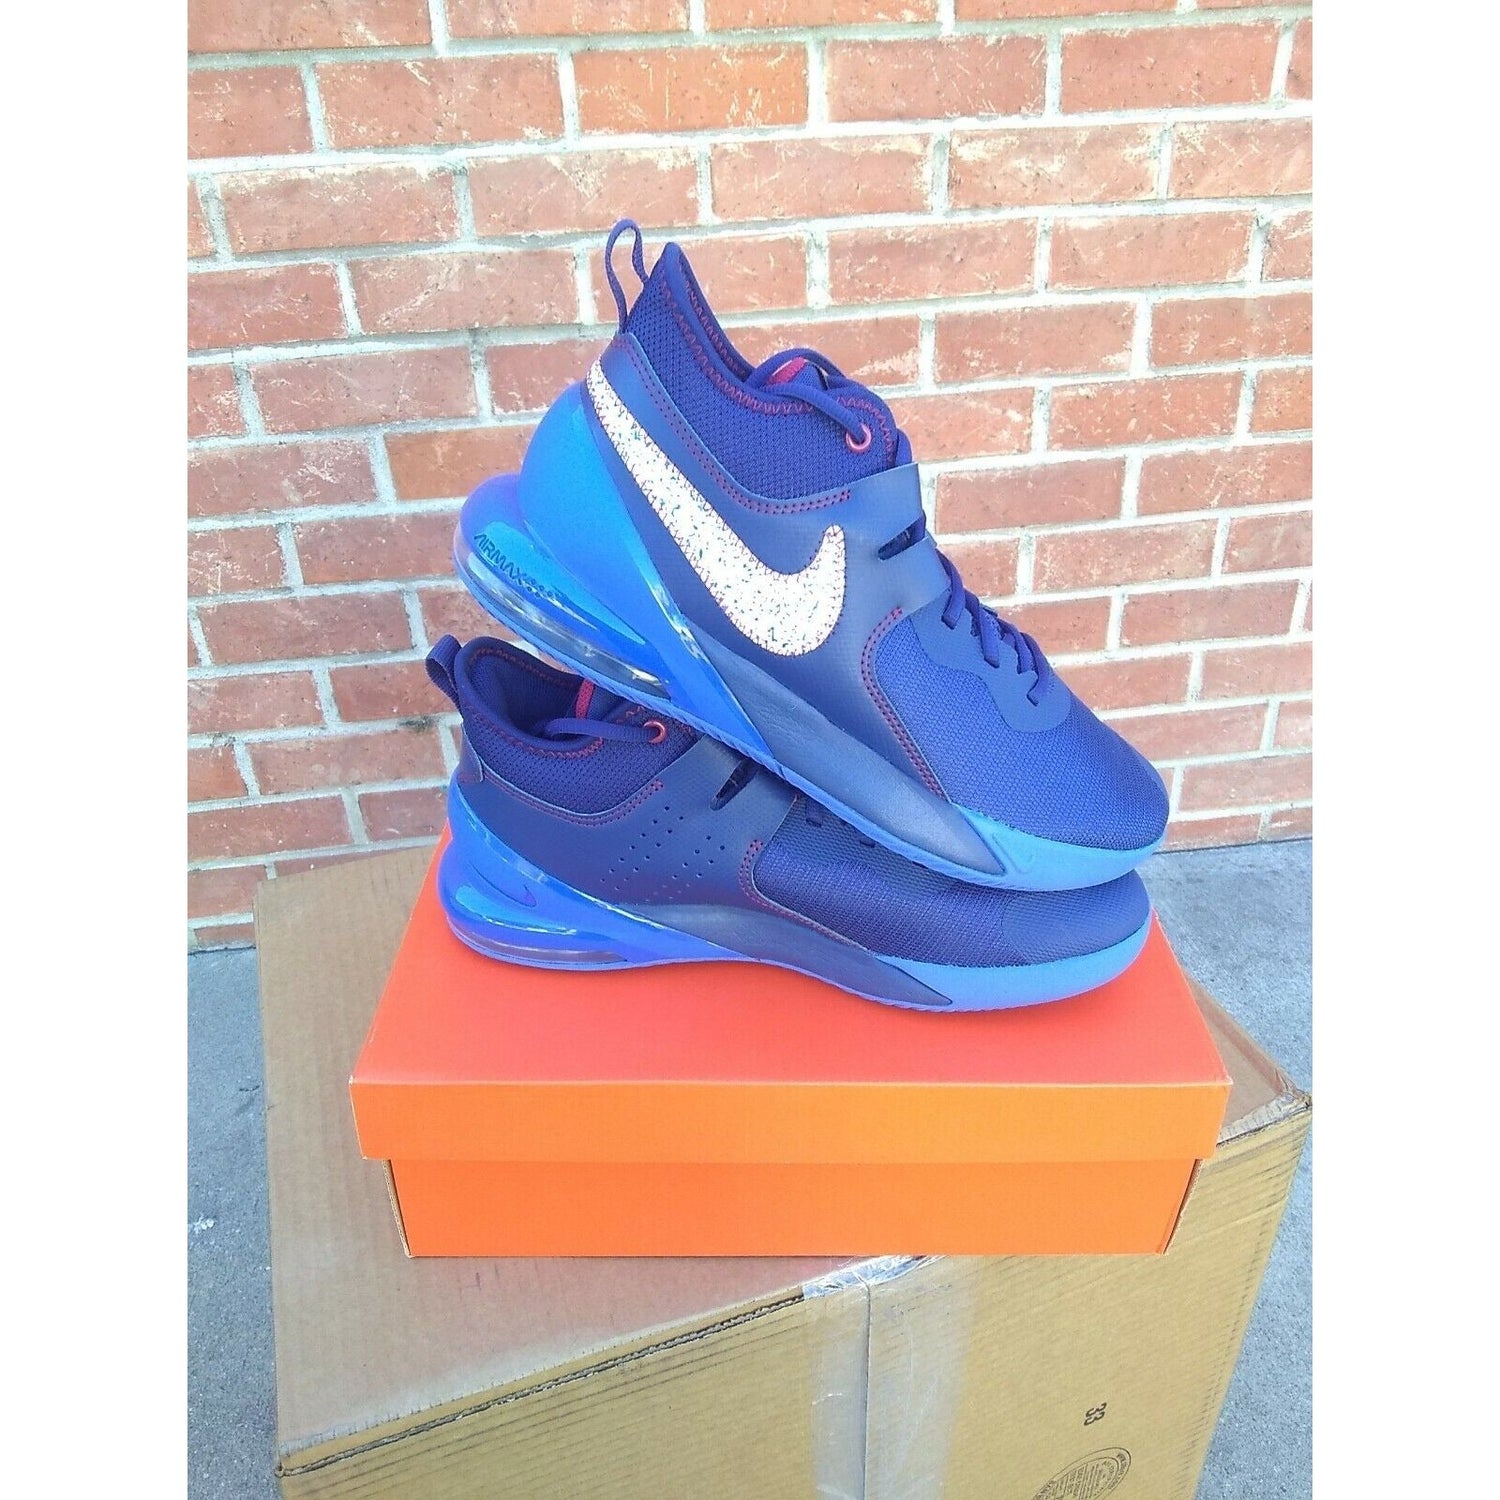 Nike Air Max Impact Running Shoes Blue Size 10.5 US Men - Classic Fashion DealsNike Air Max Impact Running Shoes Blue Size 10.5 US MenNikeClassic Fashion Deals